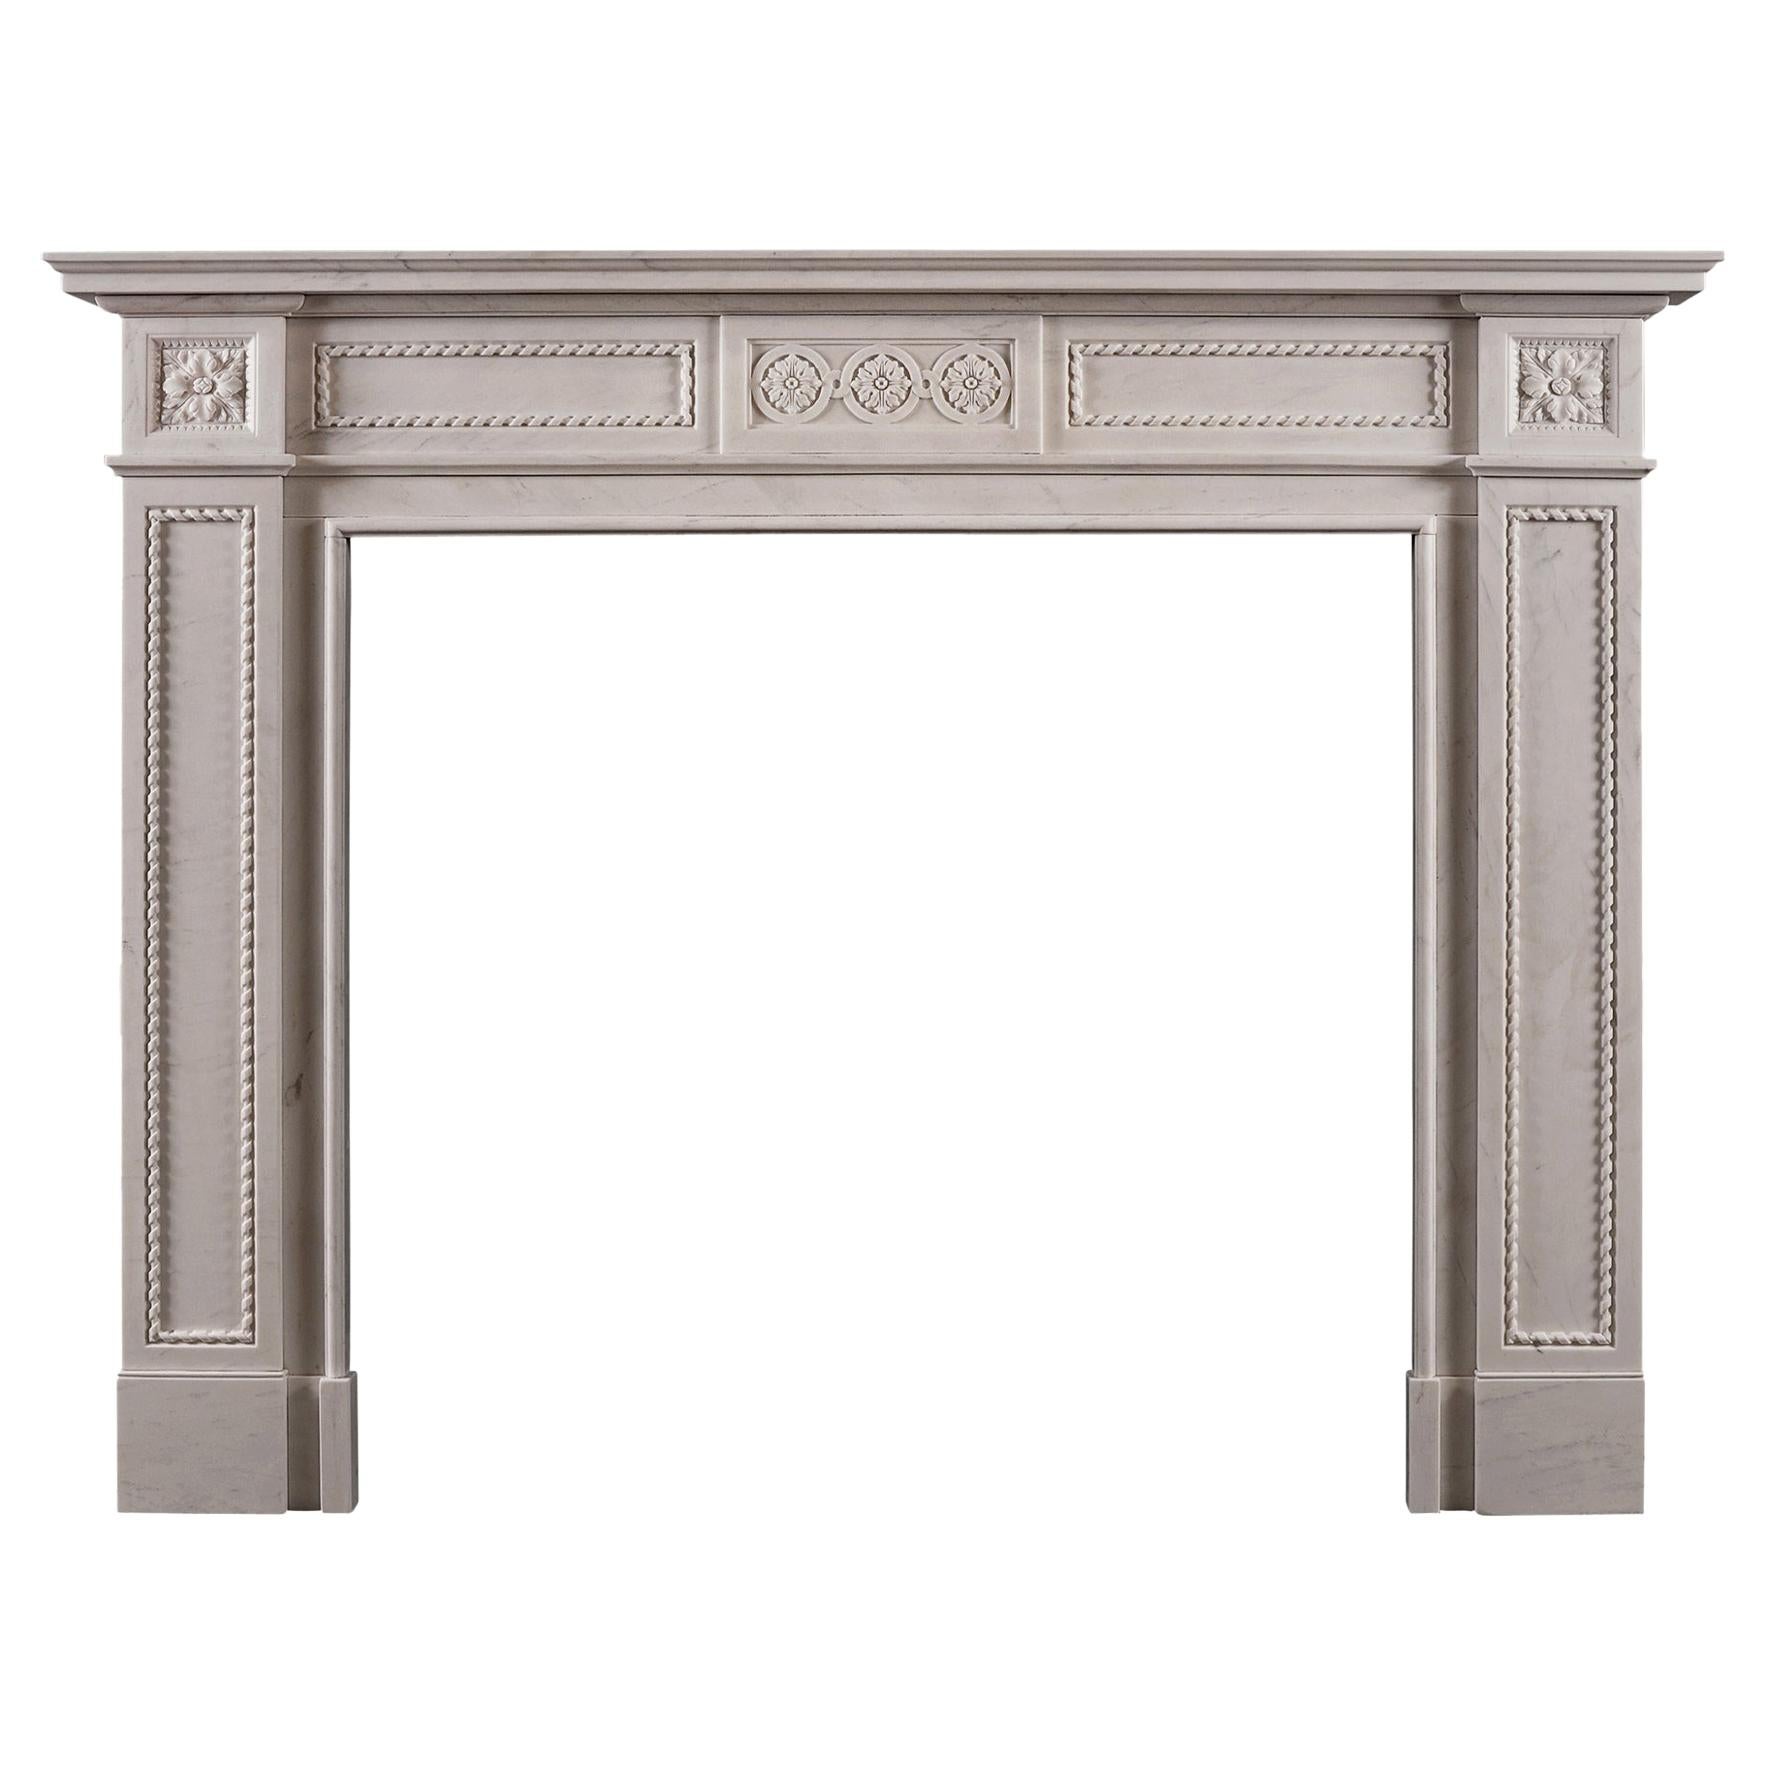 Attractive English Fireplace in the Regency Style For Sale